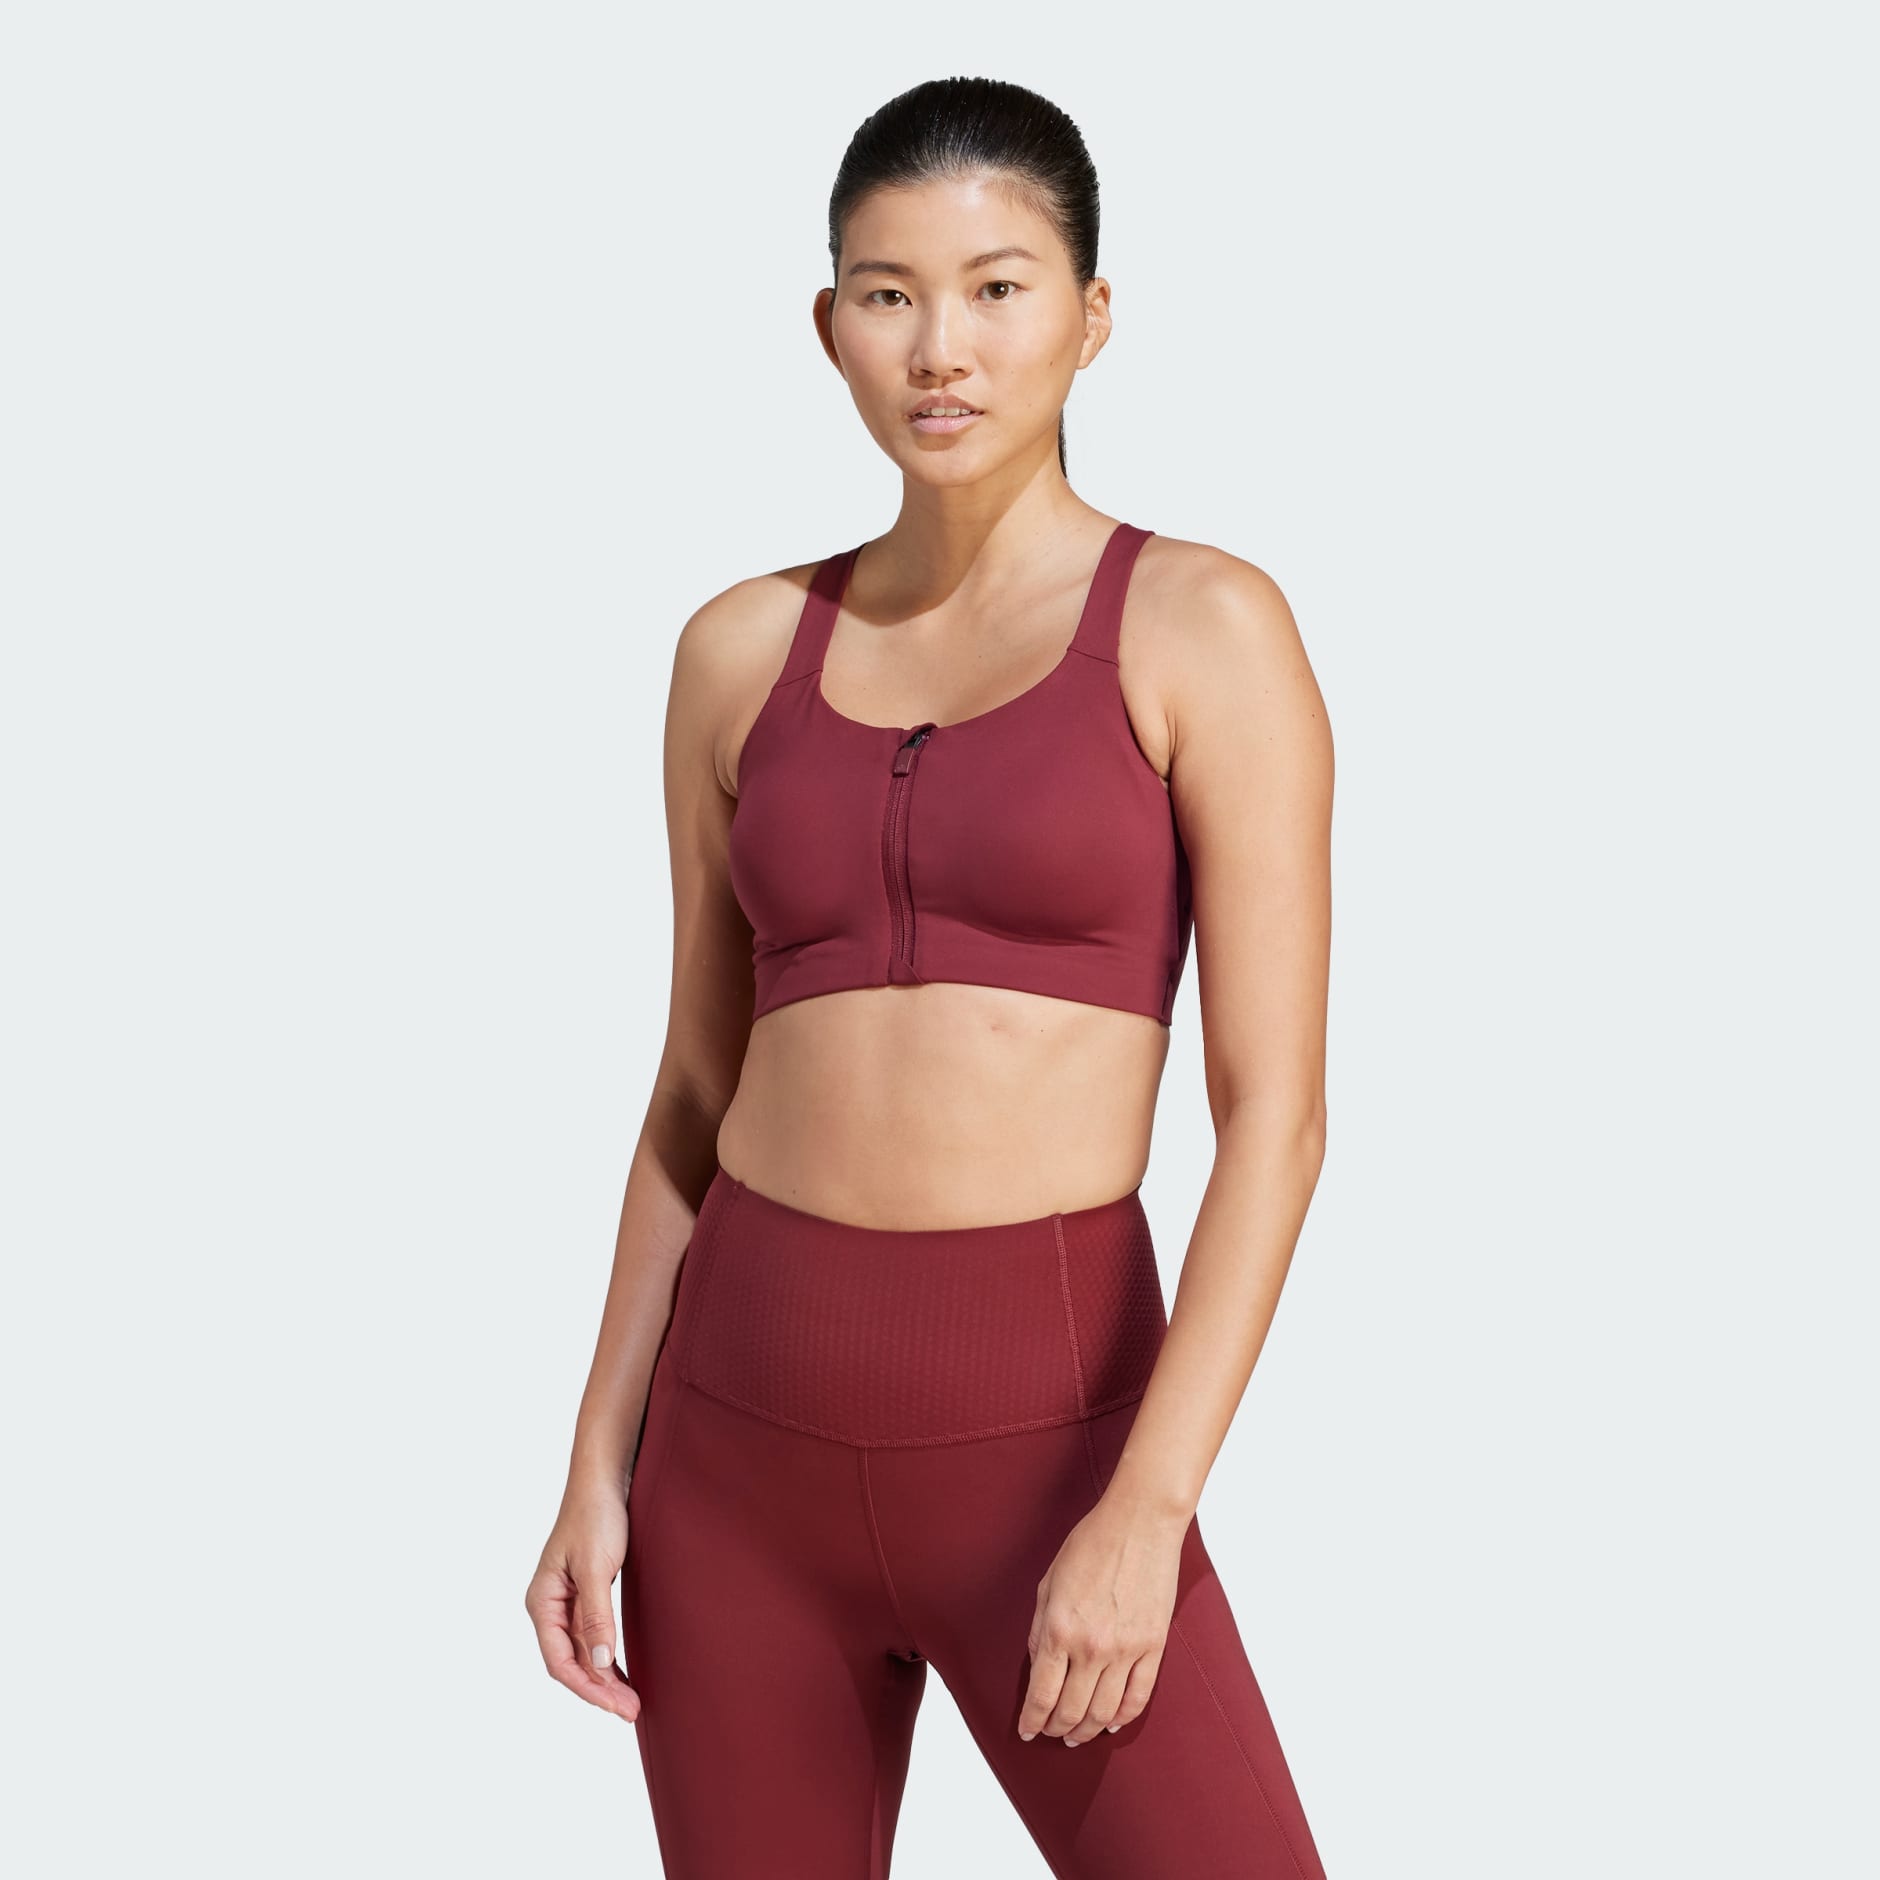 Women's Clothing - TLRD Impact Luxe High-Support Zip Bra - Burgundy